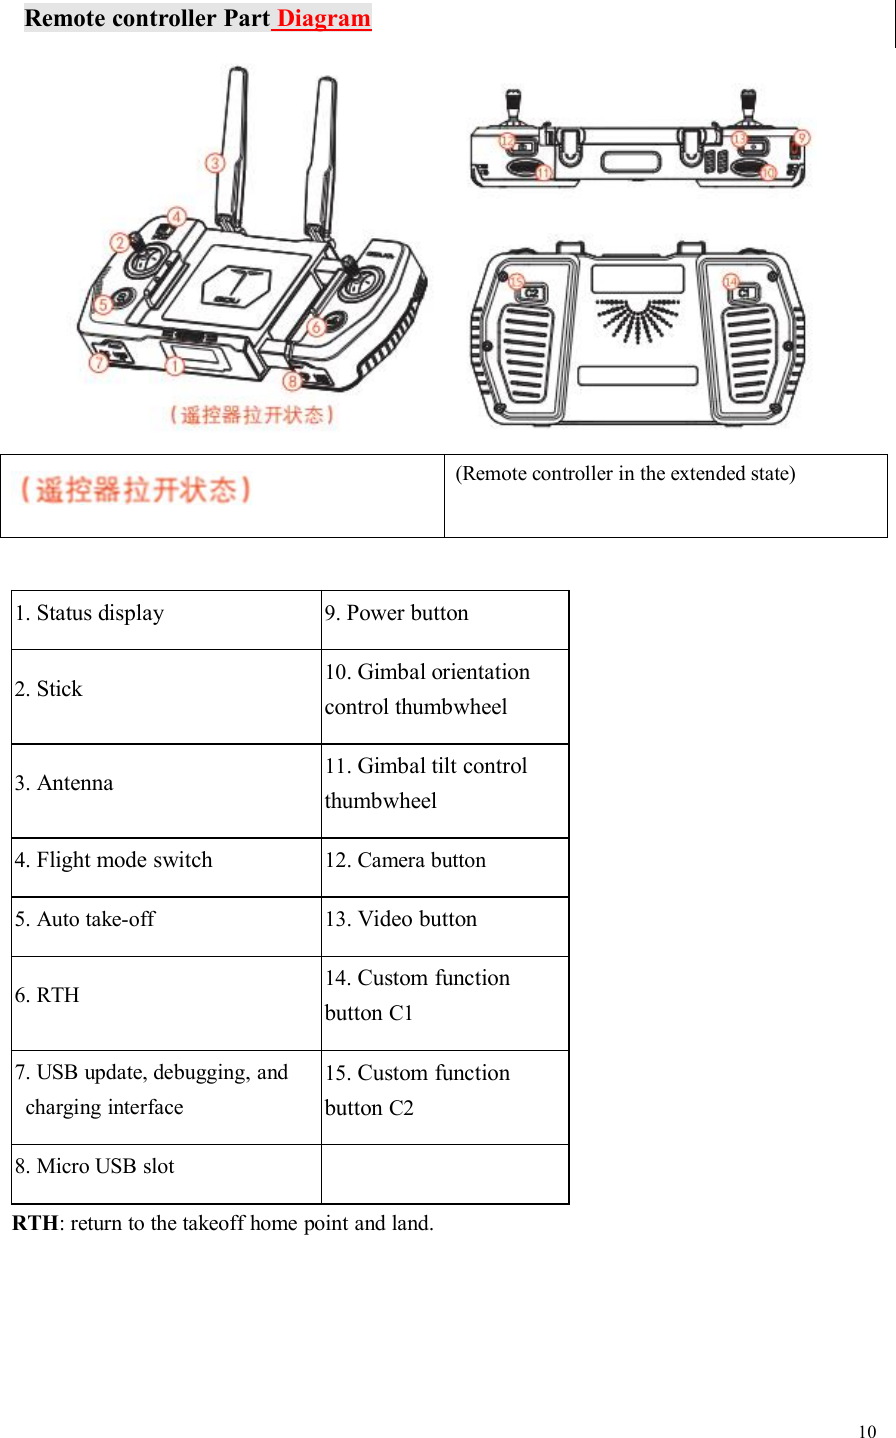 10Remote controller Part Diagram(Remote controller in the extended state)1. Status display9. Power button2. Stick10. Gimbal orientationcontrol thumbwheel3. Antenna11. Gimbal tilt controlthumbwheel4. Flight mode switch12. Camera button5. Auto take-off13. Video button6. RTH14. Custom functionbutton C17. USB update, debugging, andcharging interface15. Custom functionbutton C28. Micro USB slotRTH: return to the takeoff home point and land.